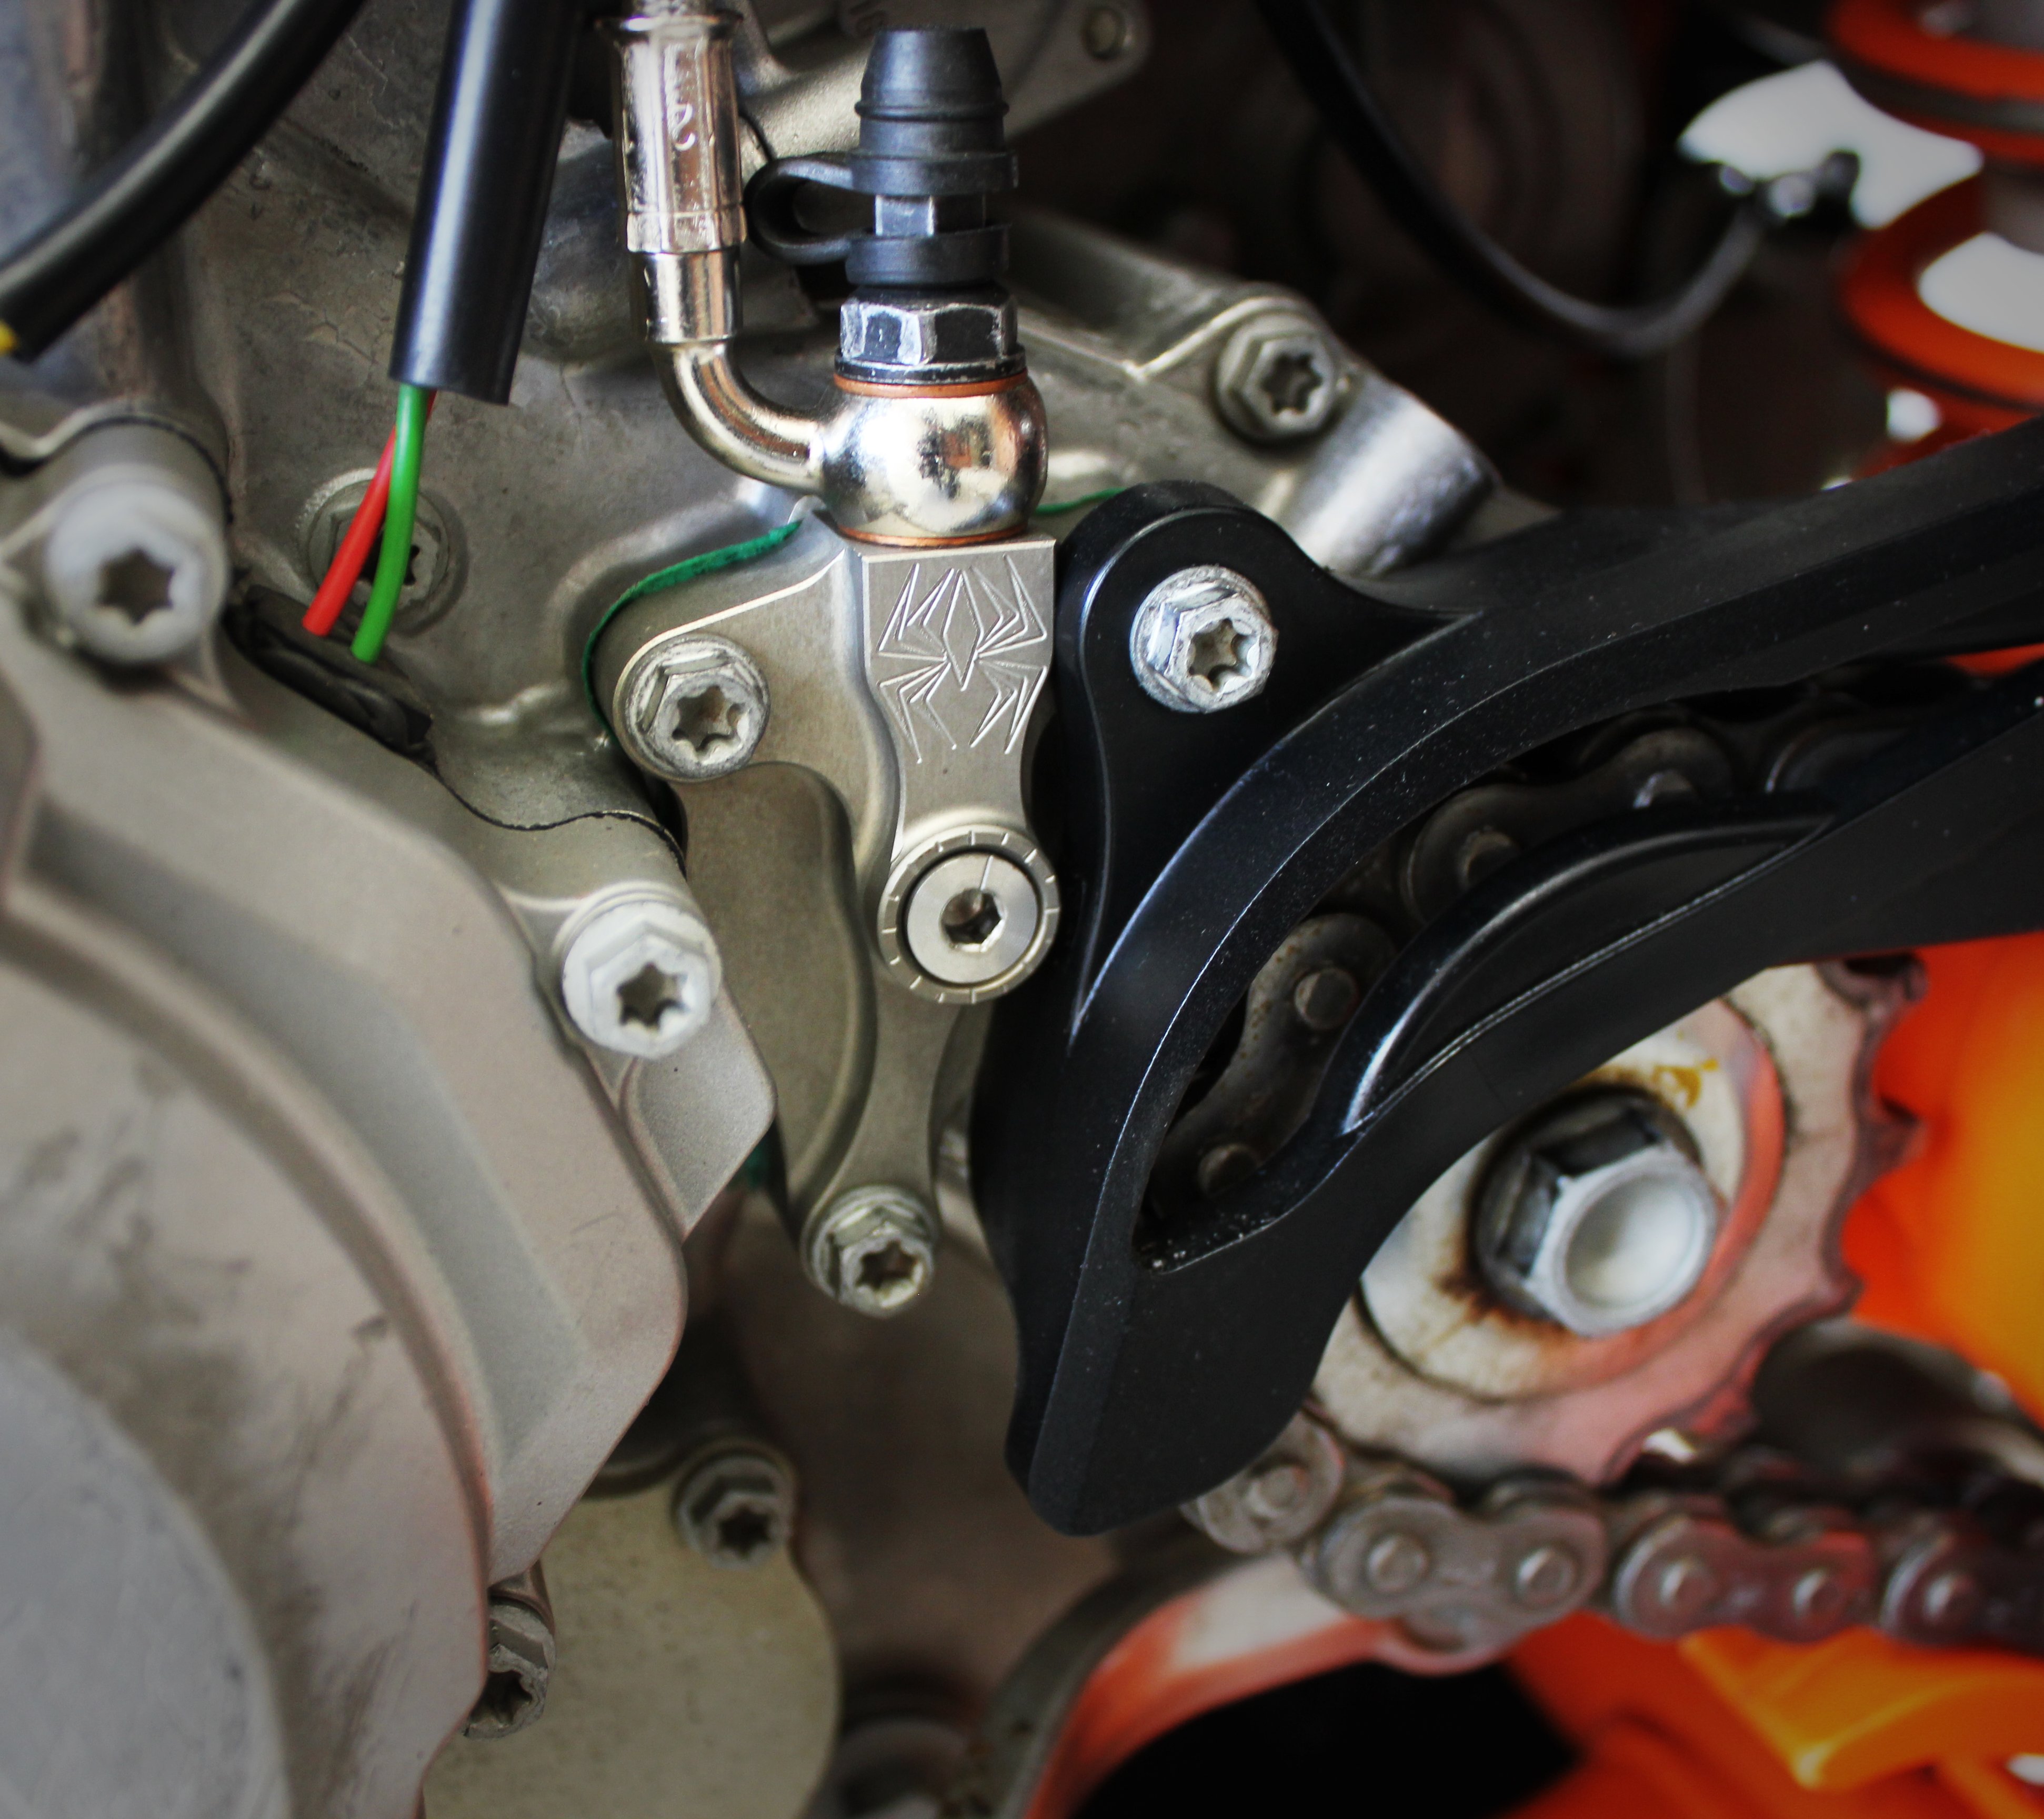 Available Now The Hydraulic Clutch Kit For CRF 250 Fix , 45% OFF